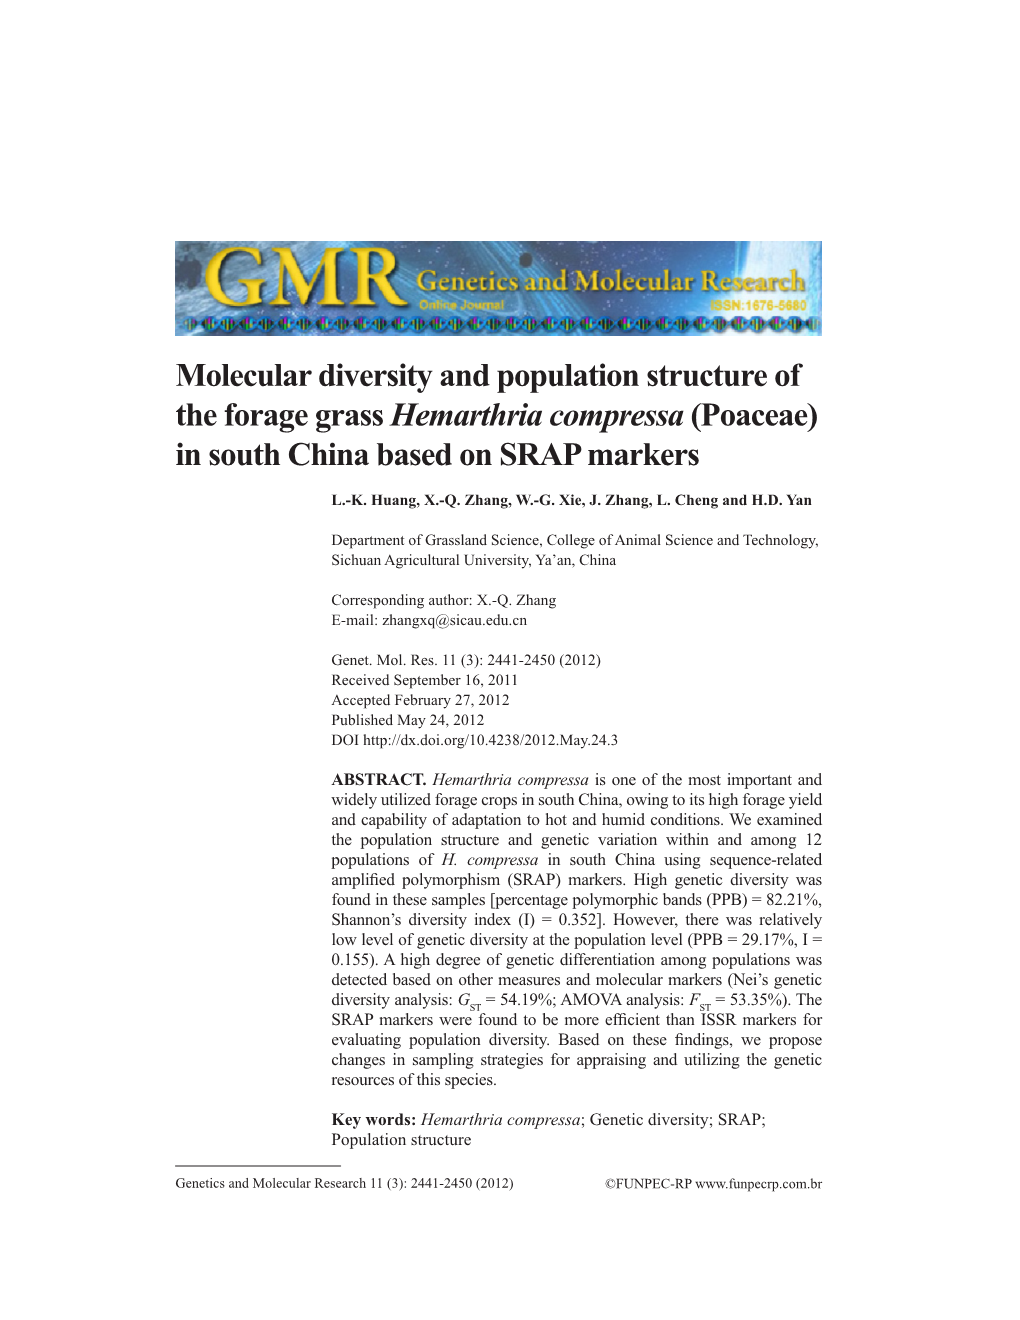 Molecular Diversity and Population Structure of the Forage Grass Hemarthria Compressa (Poaceae) in South China Based on SRAP Markers